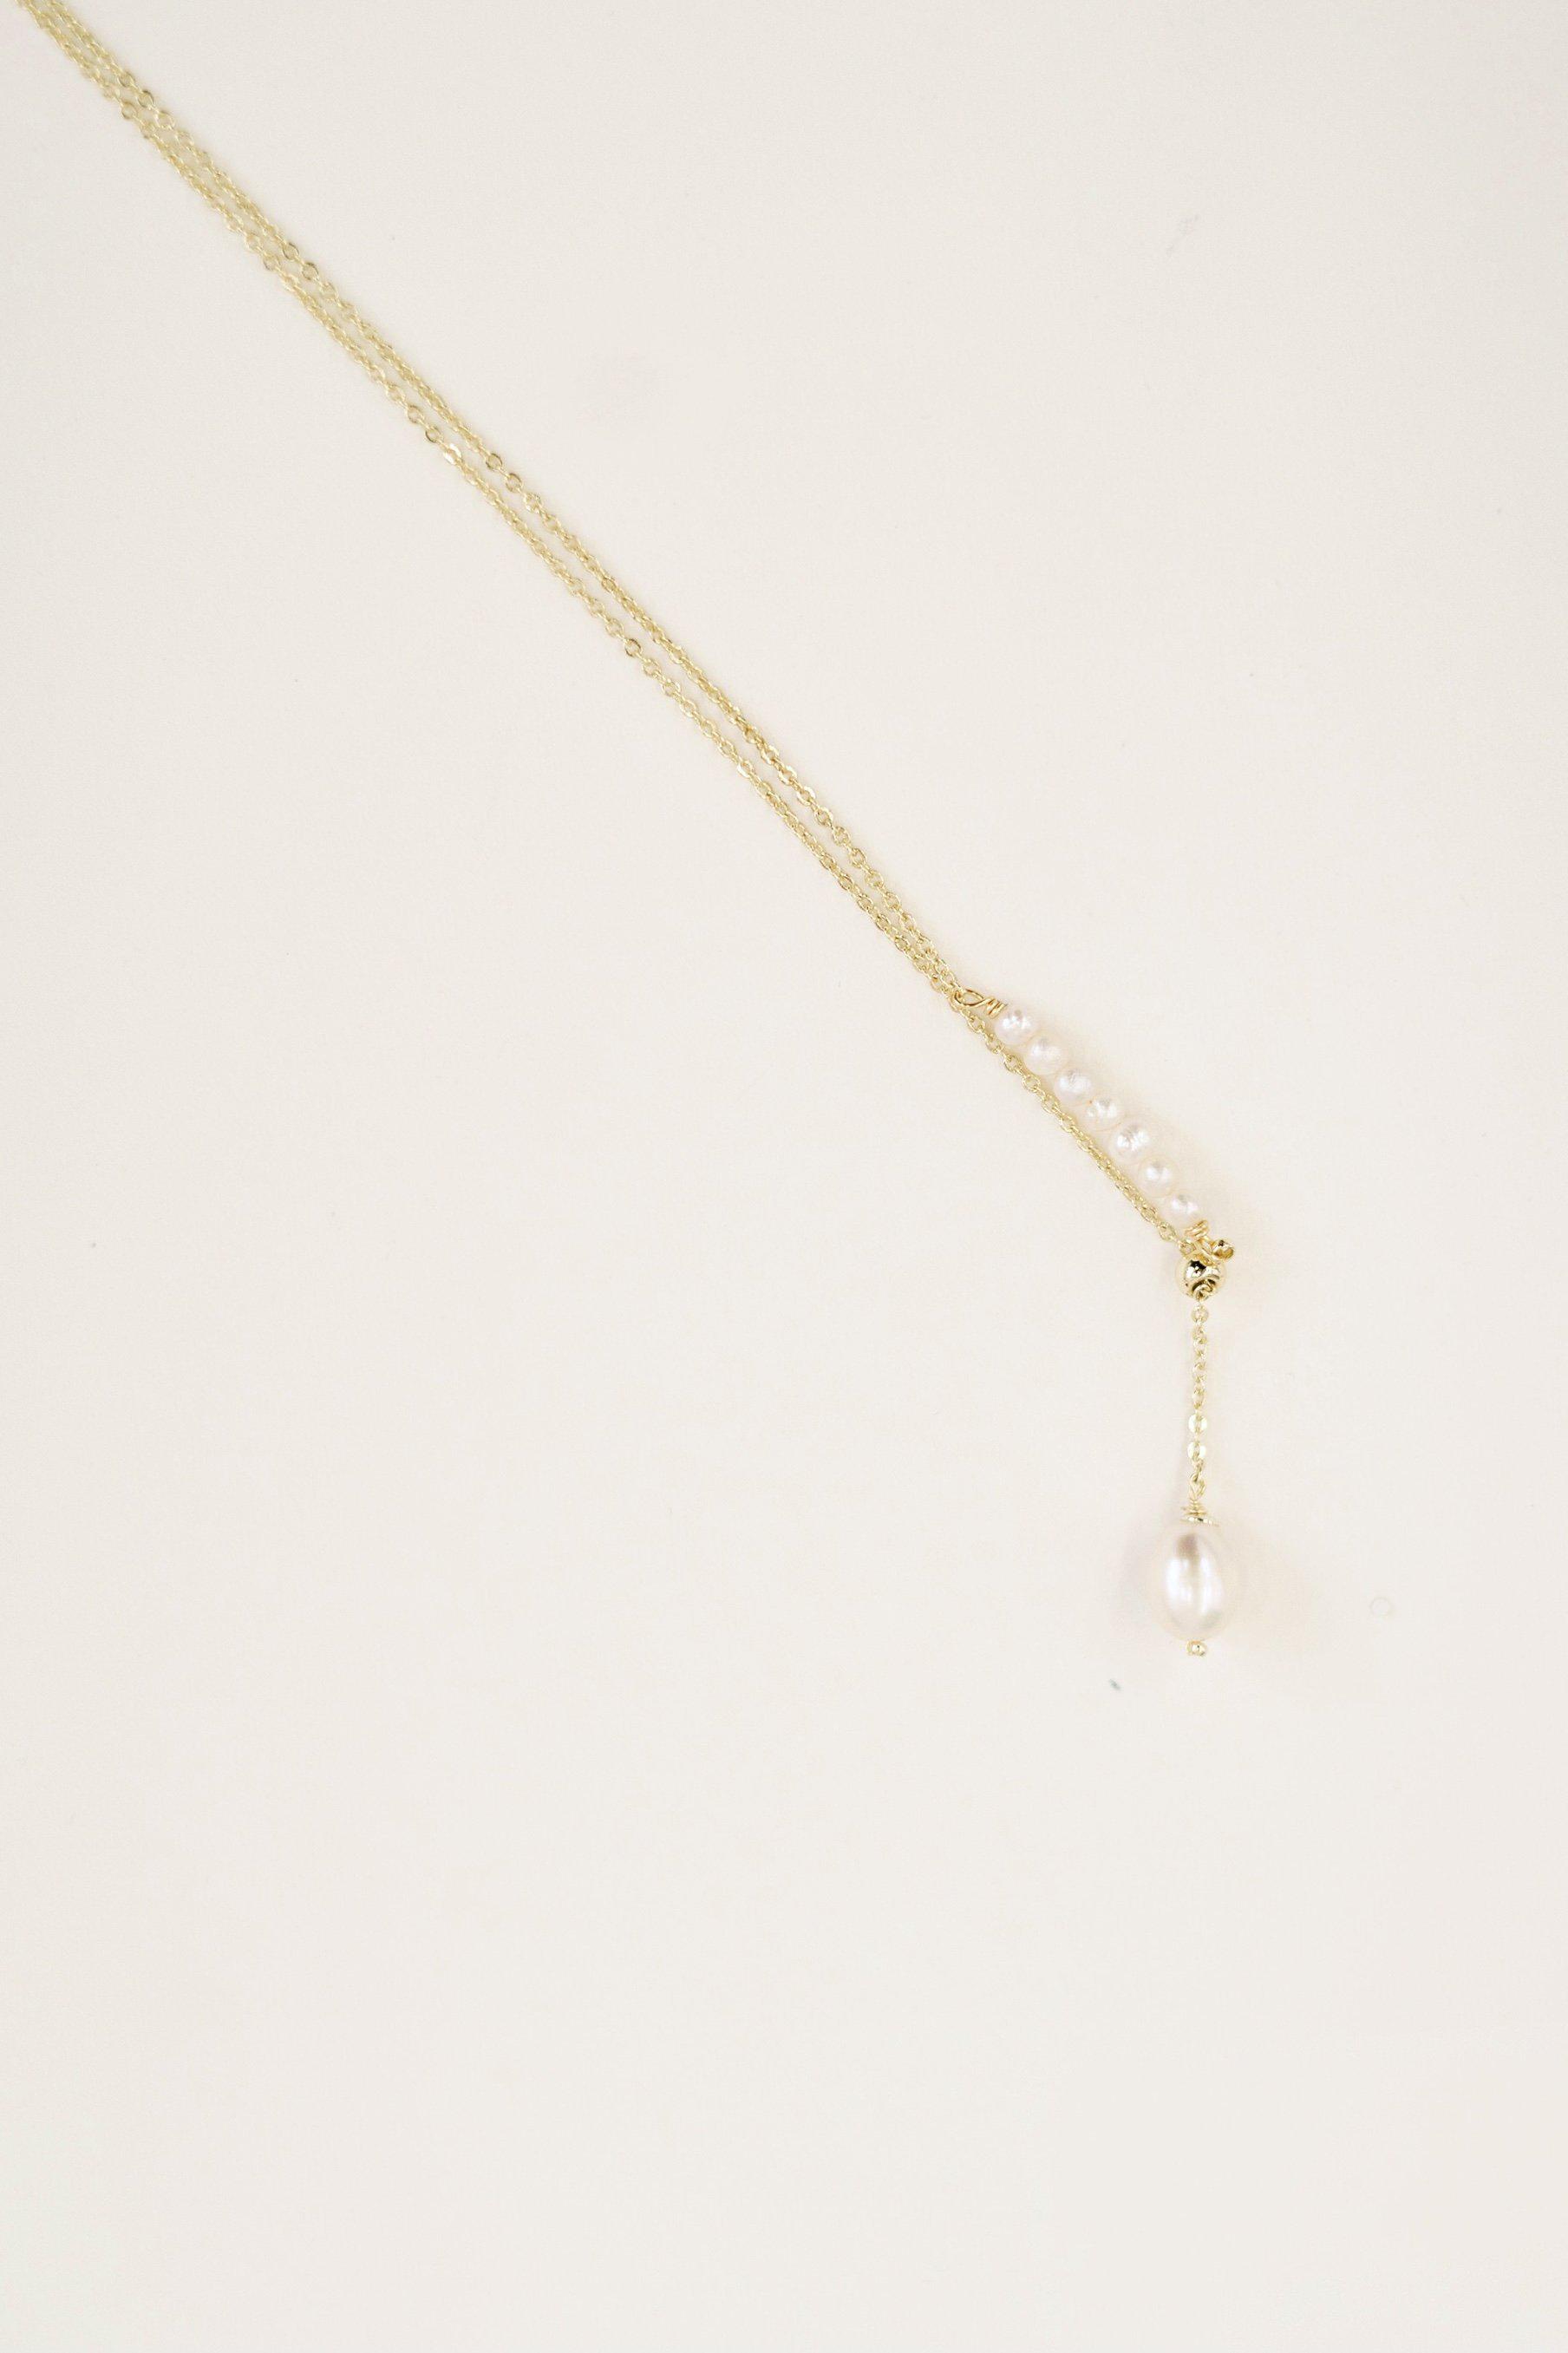 Everlasting Gold Plated Necklace